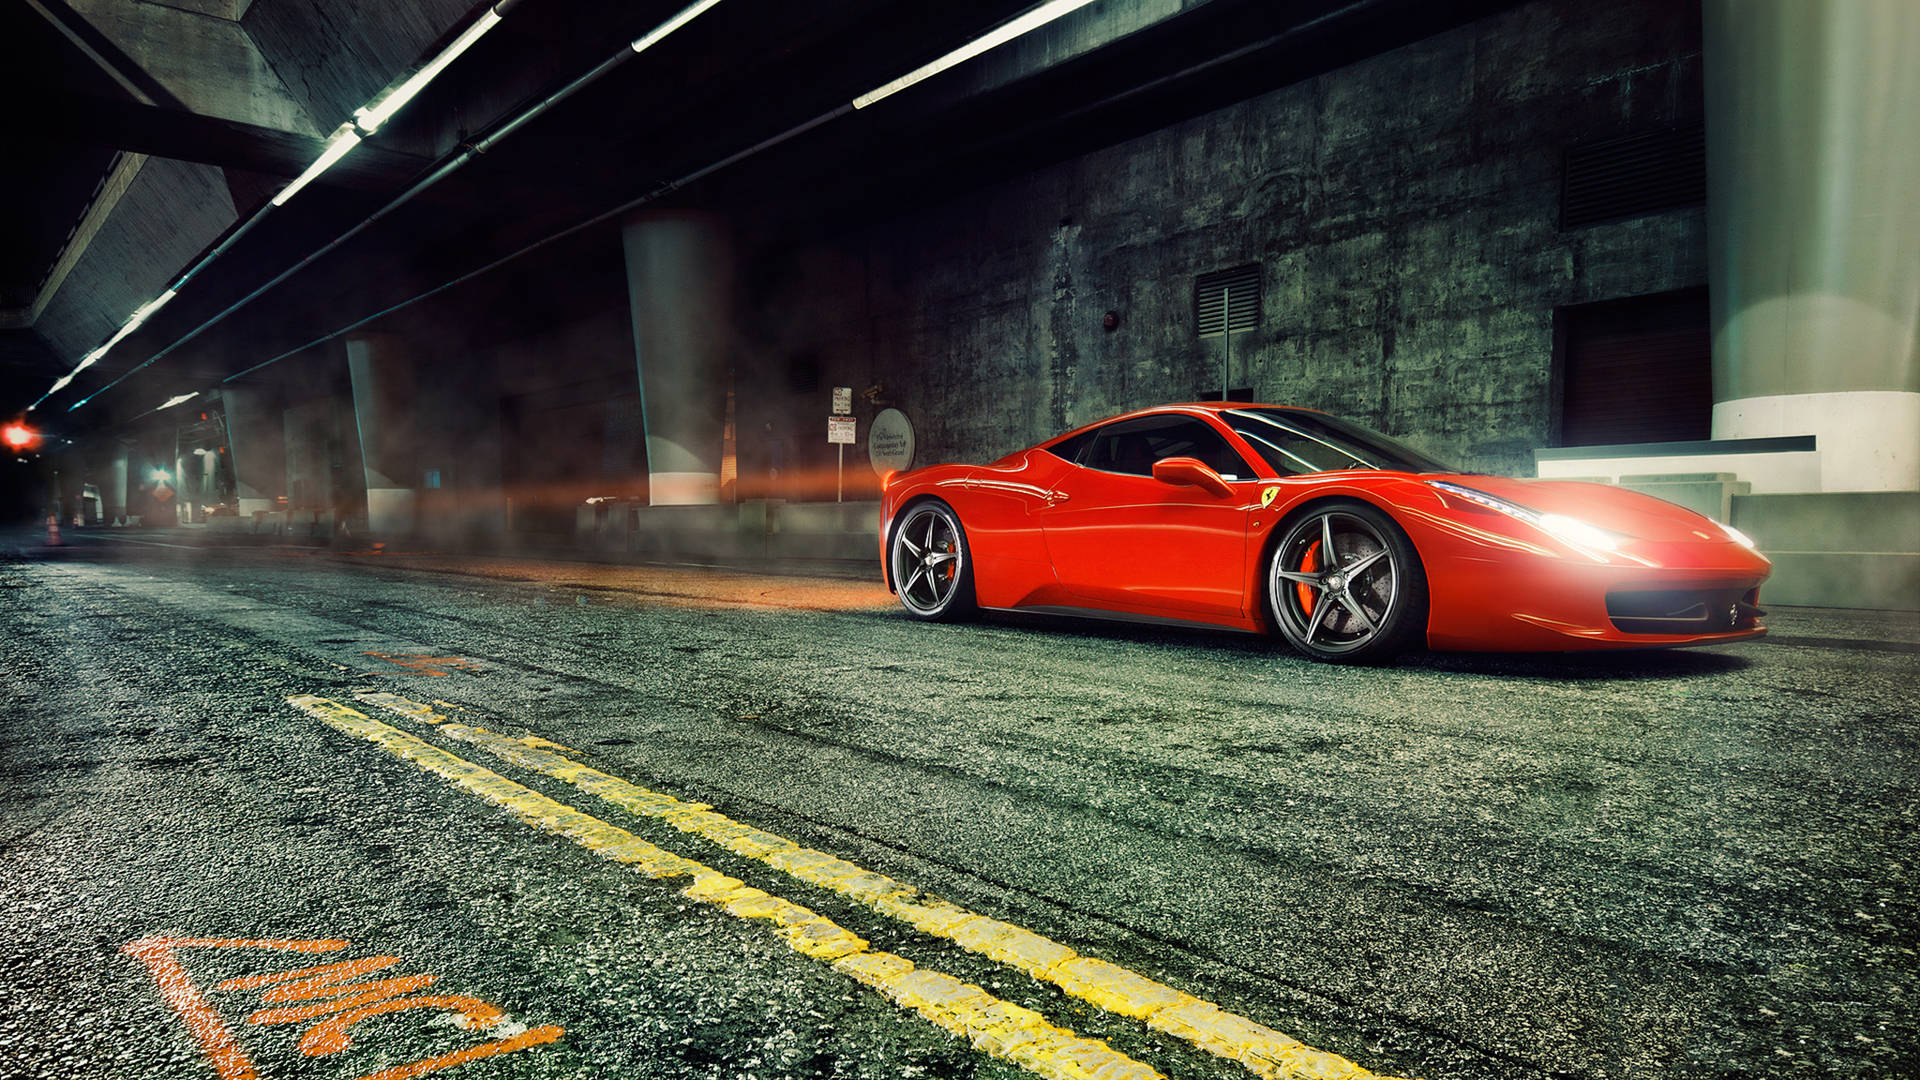 Modern Luxury Sports Car On A Highway Scenery Background